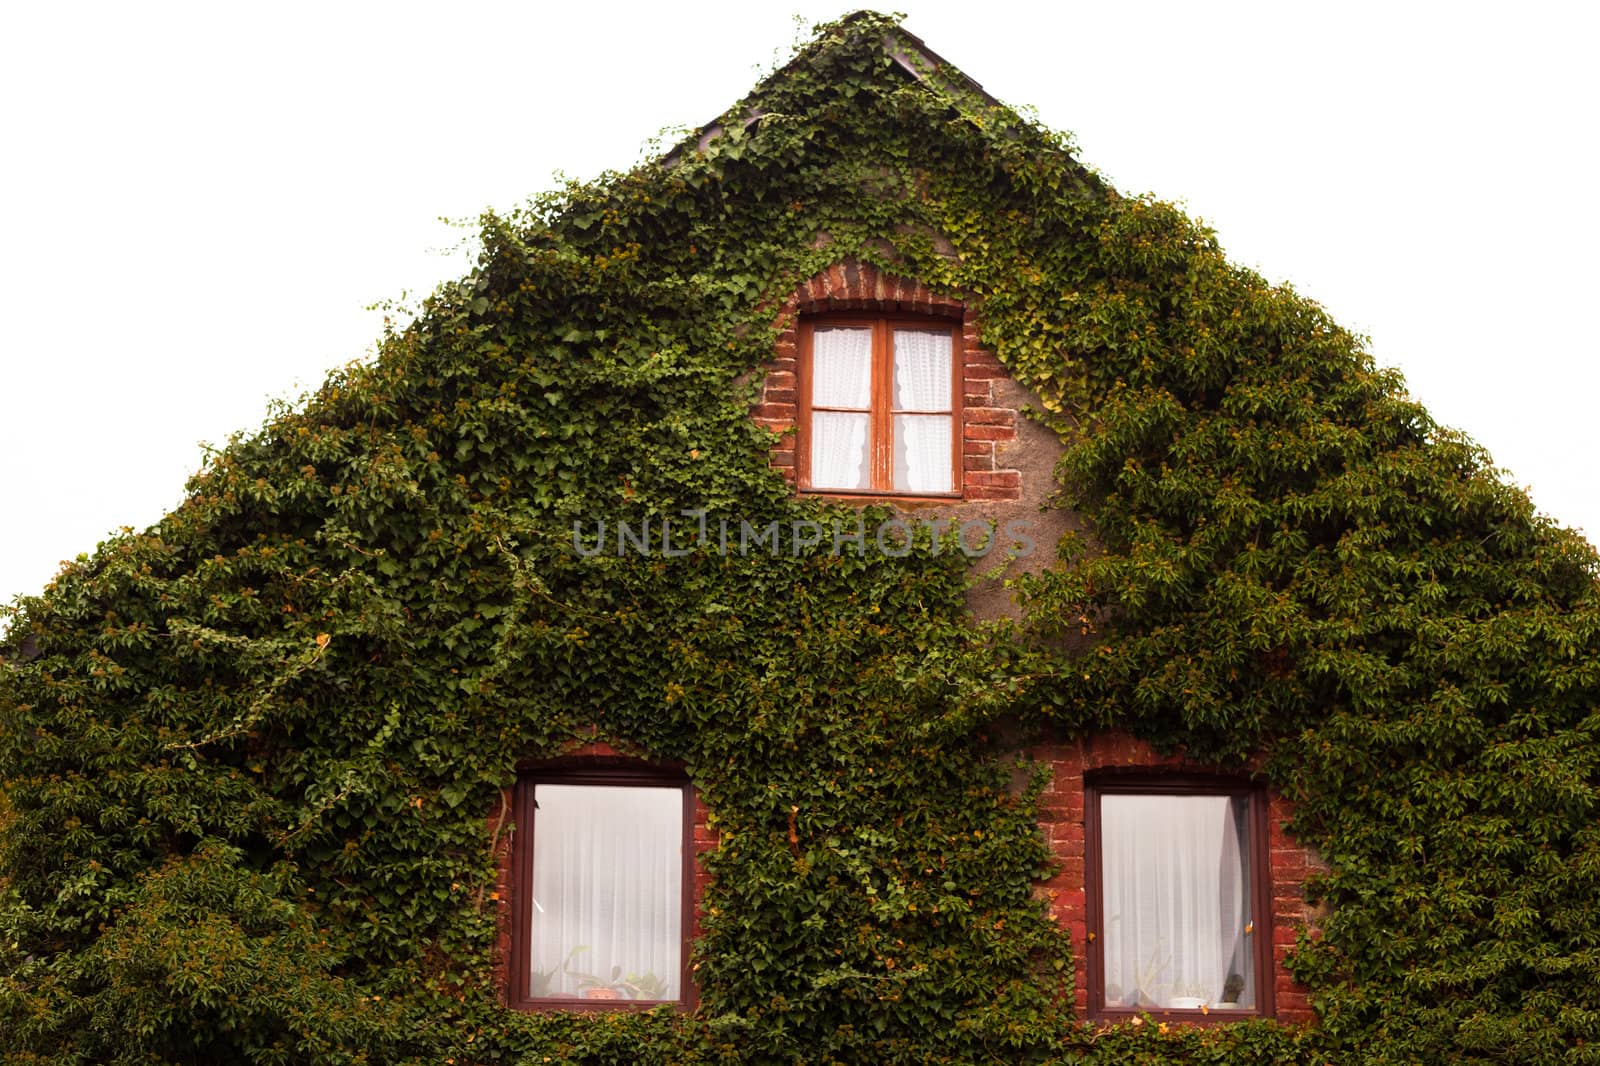 Common Ivy (Hedera helix) totally covers stone gable wall of house.